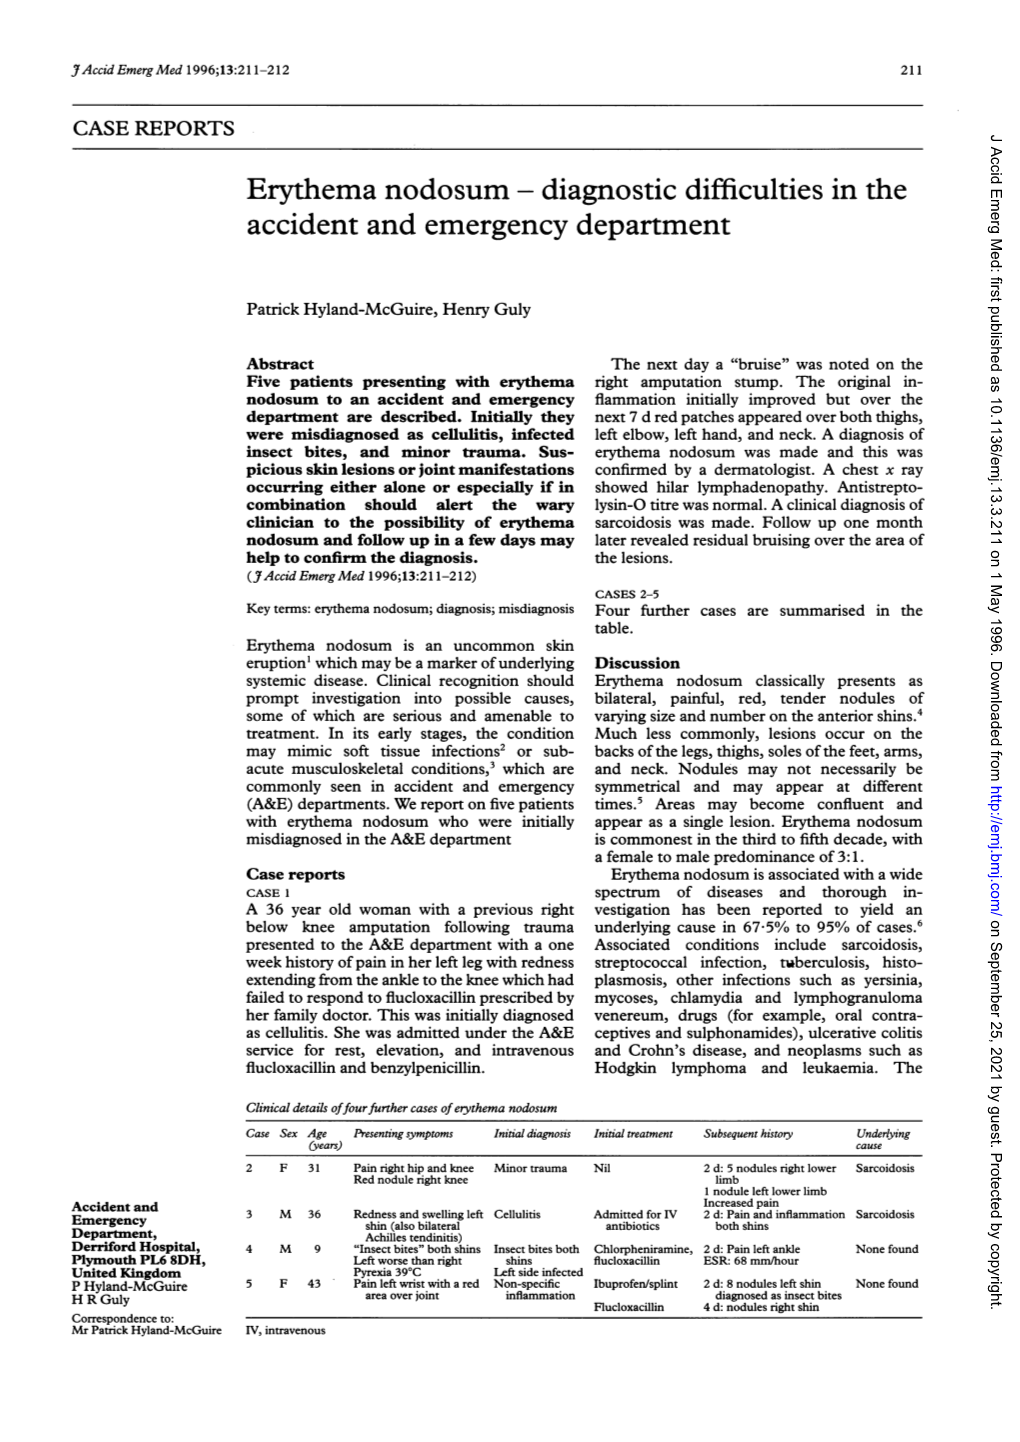 Erythema Nodosum Diagnostic Difficulties in the Accident and Emergency Department